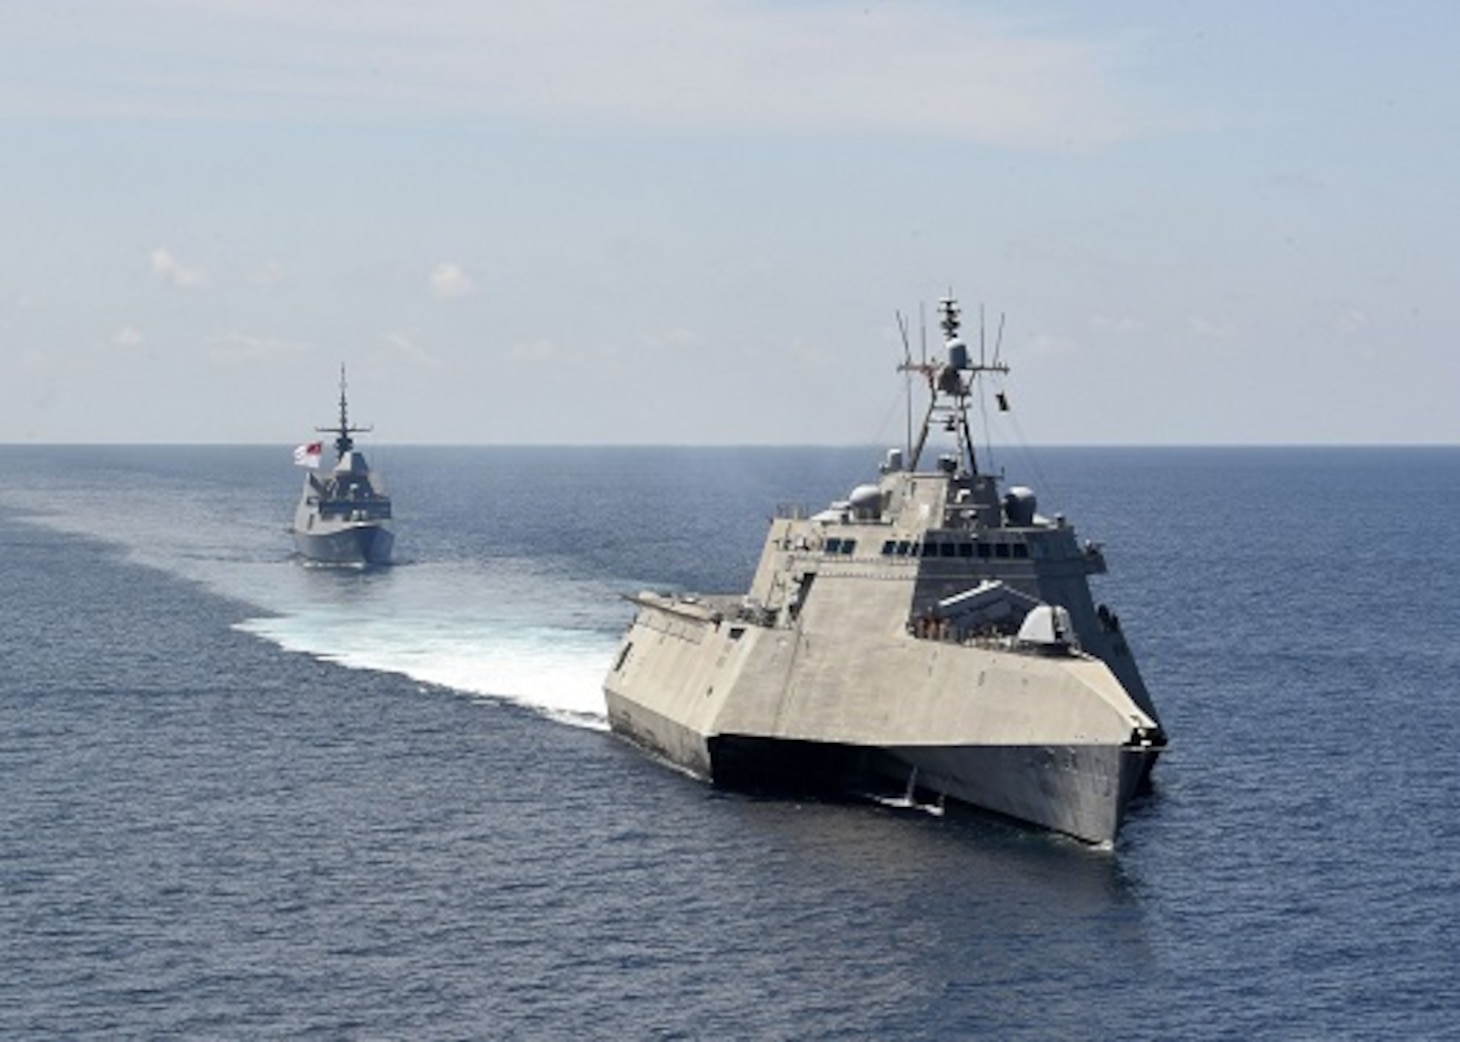 U.S., Singapore navies exercise together in the South China Sea